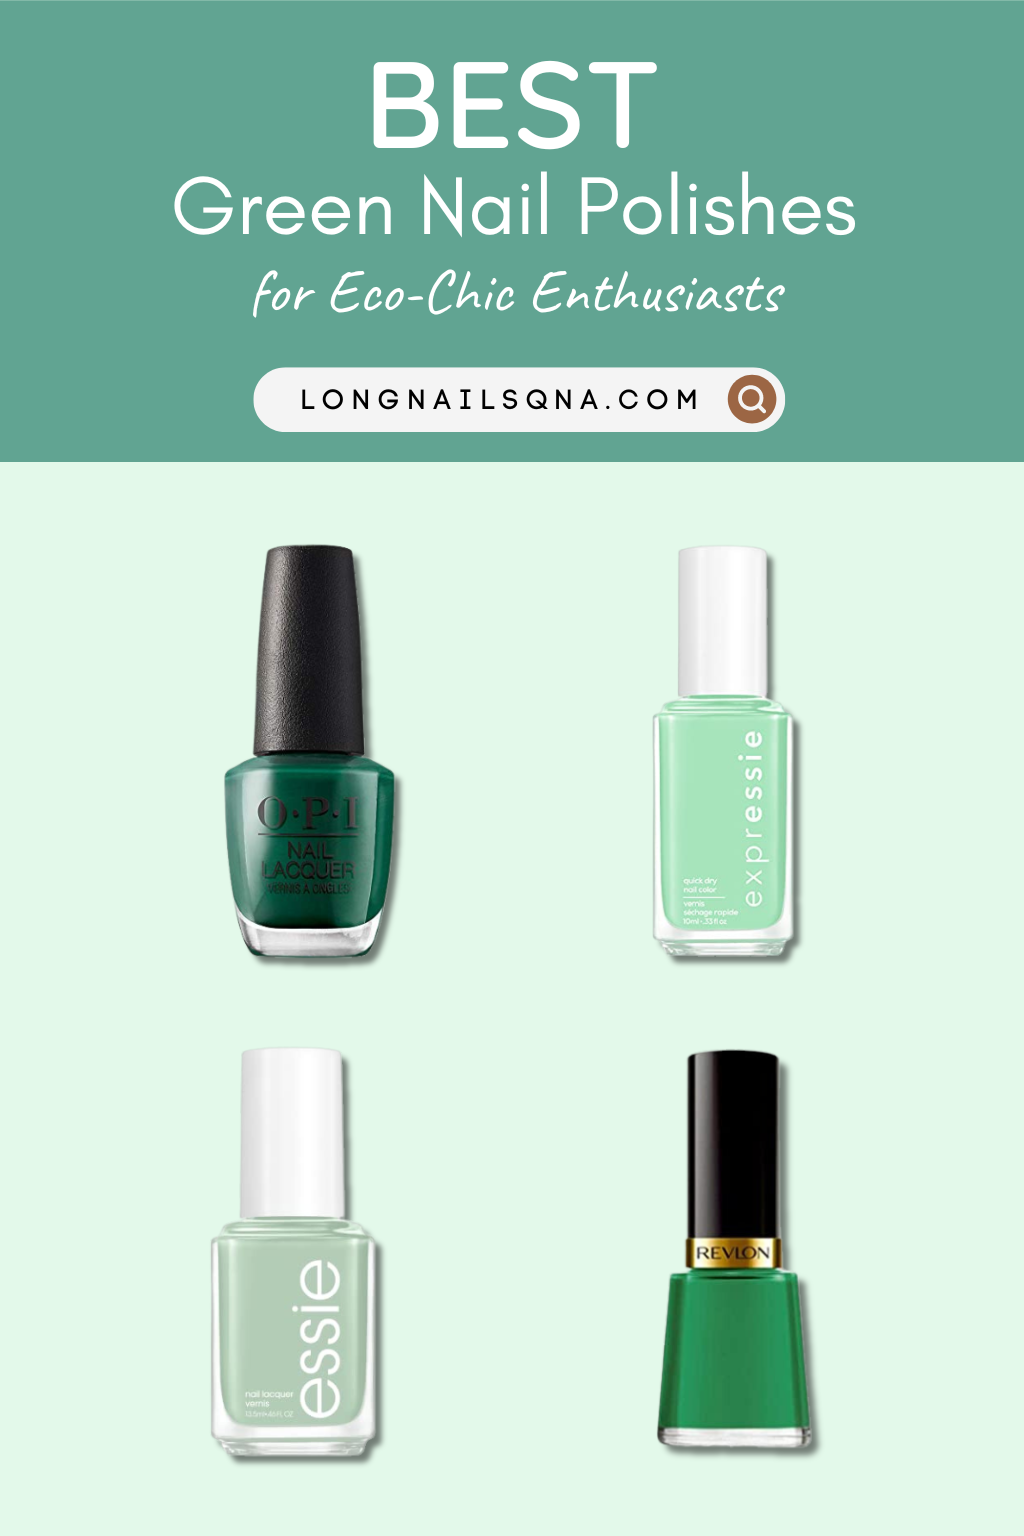 Best Green Nail Polishes for Eco-Chic Enthusiasts